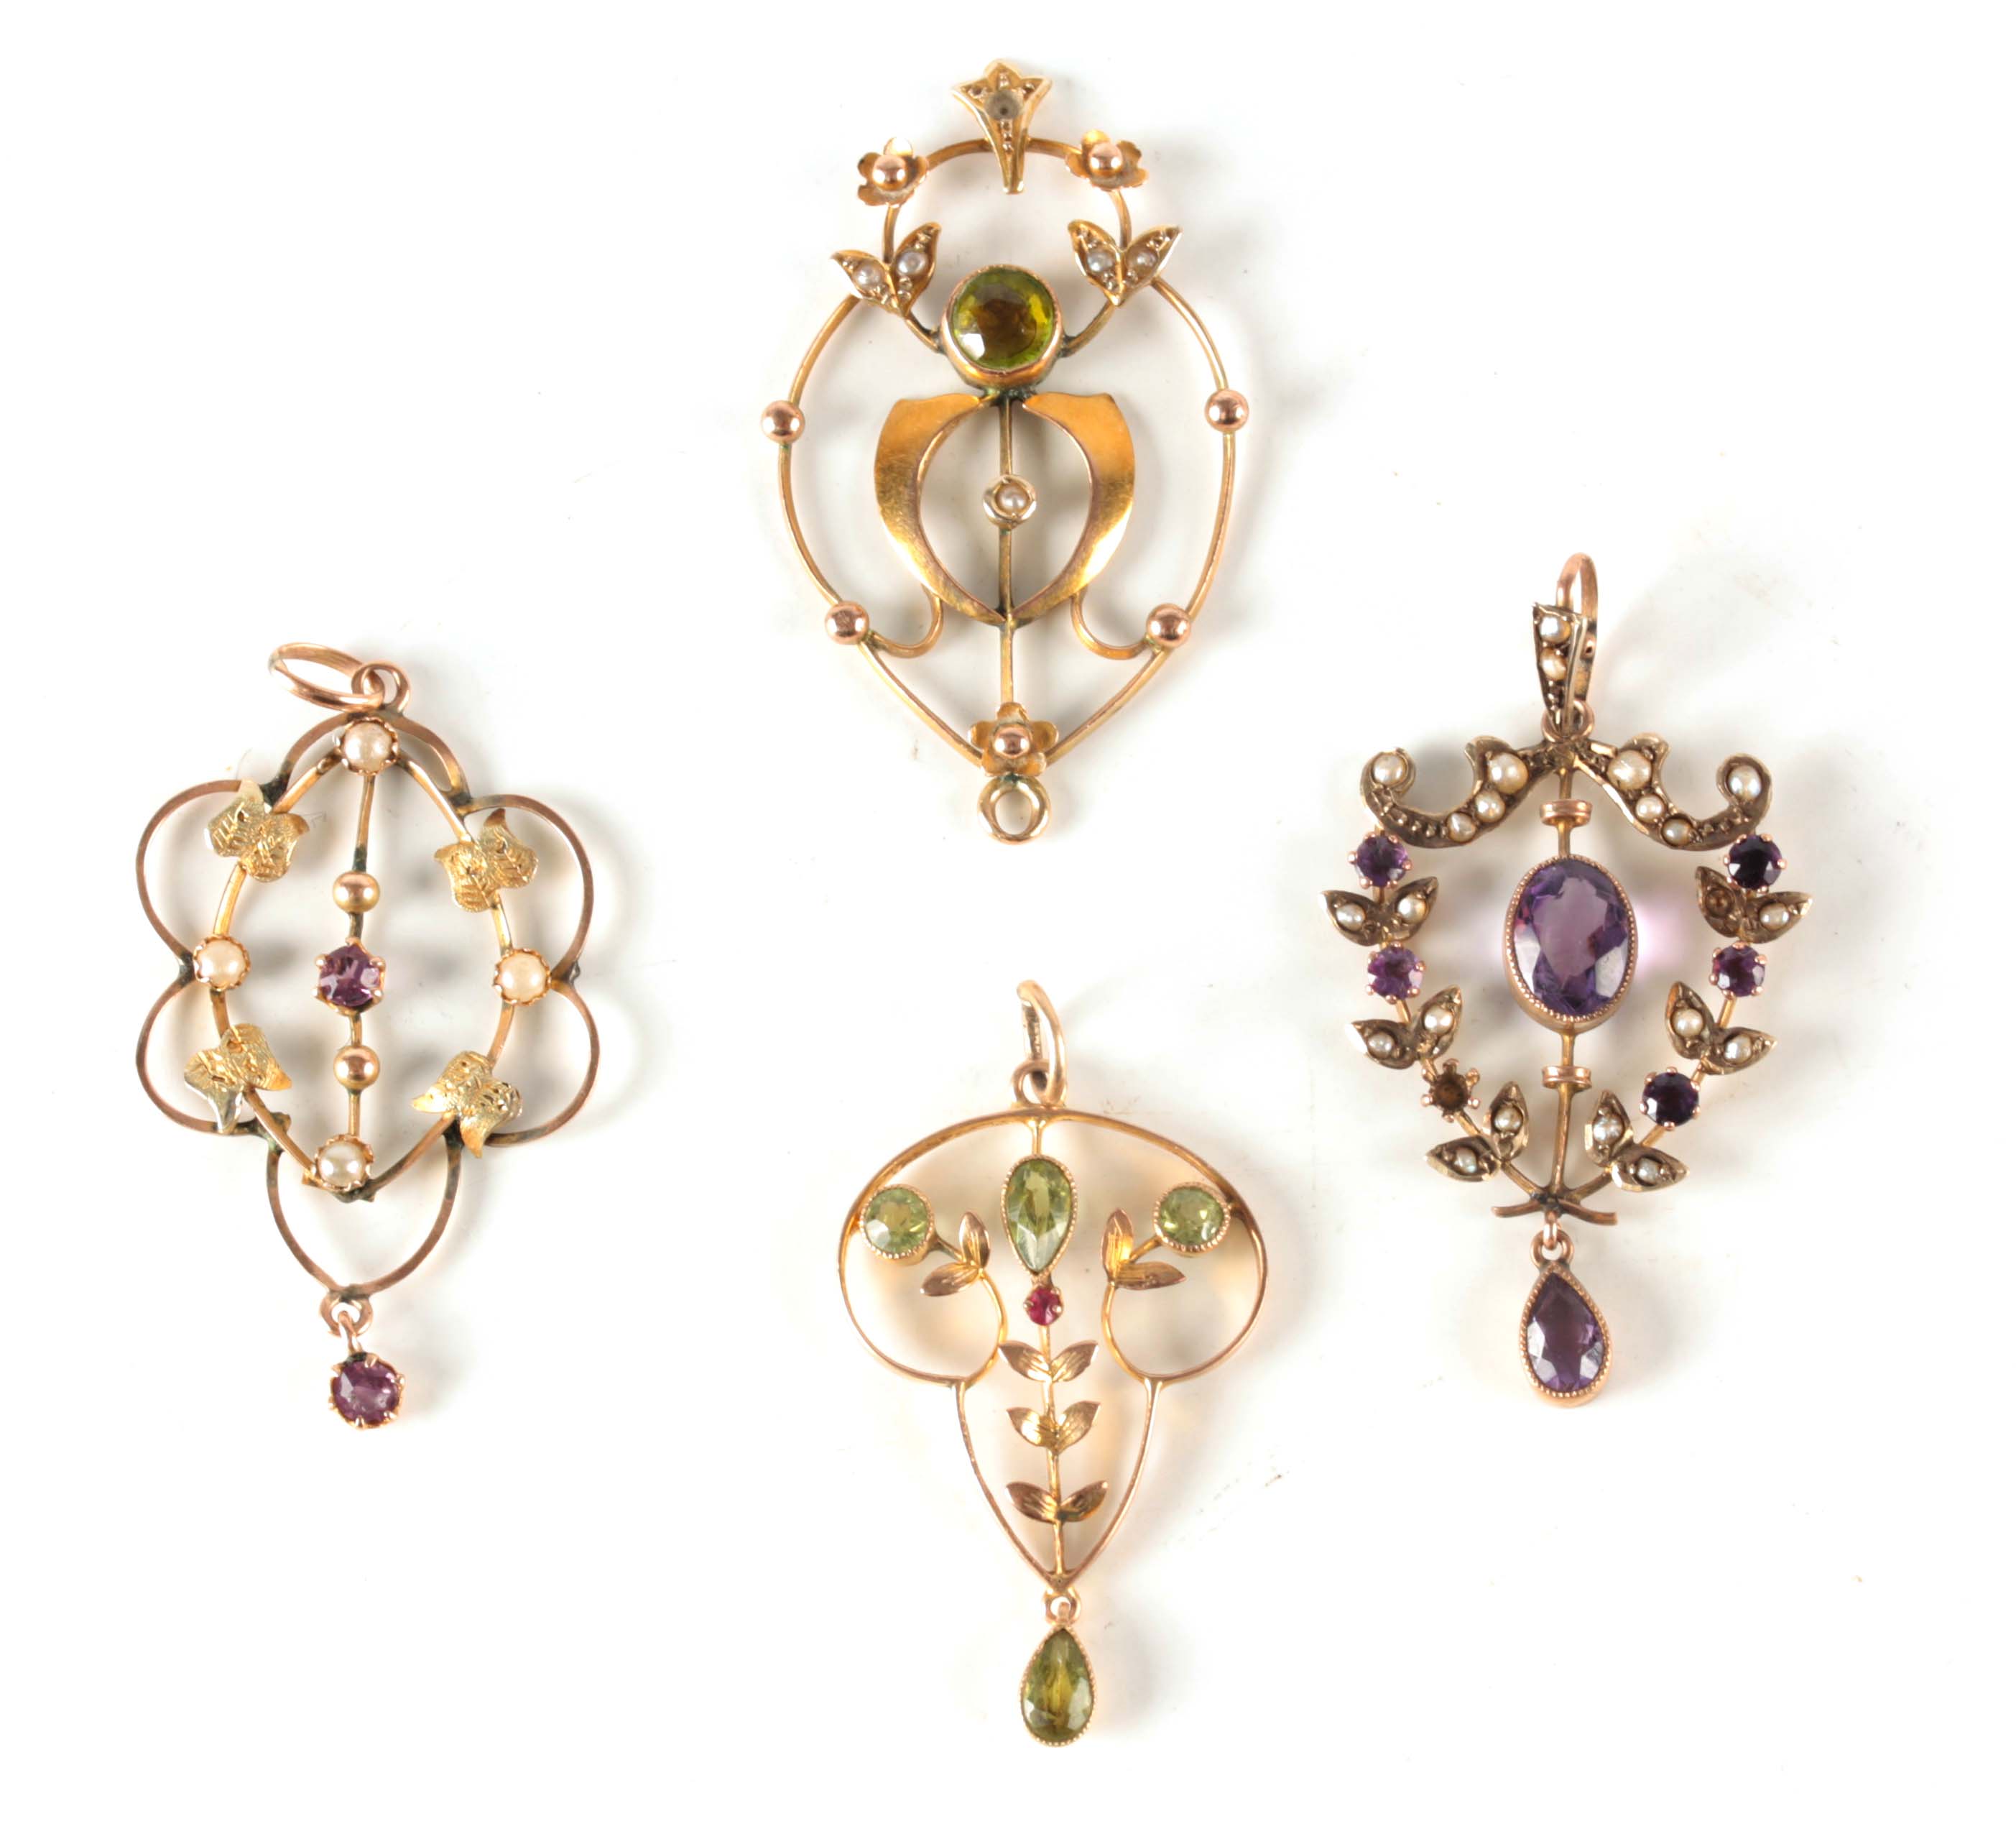 A COLLECTION OF FOUR ART NOUVEAU GOLD PENDANTS set with amethyst, ruby and pearls - total weight